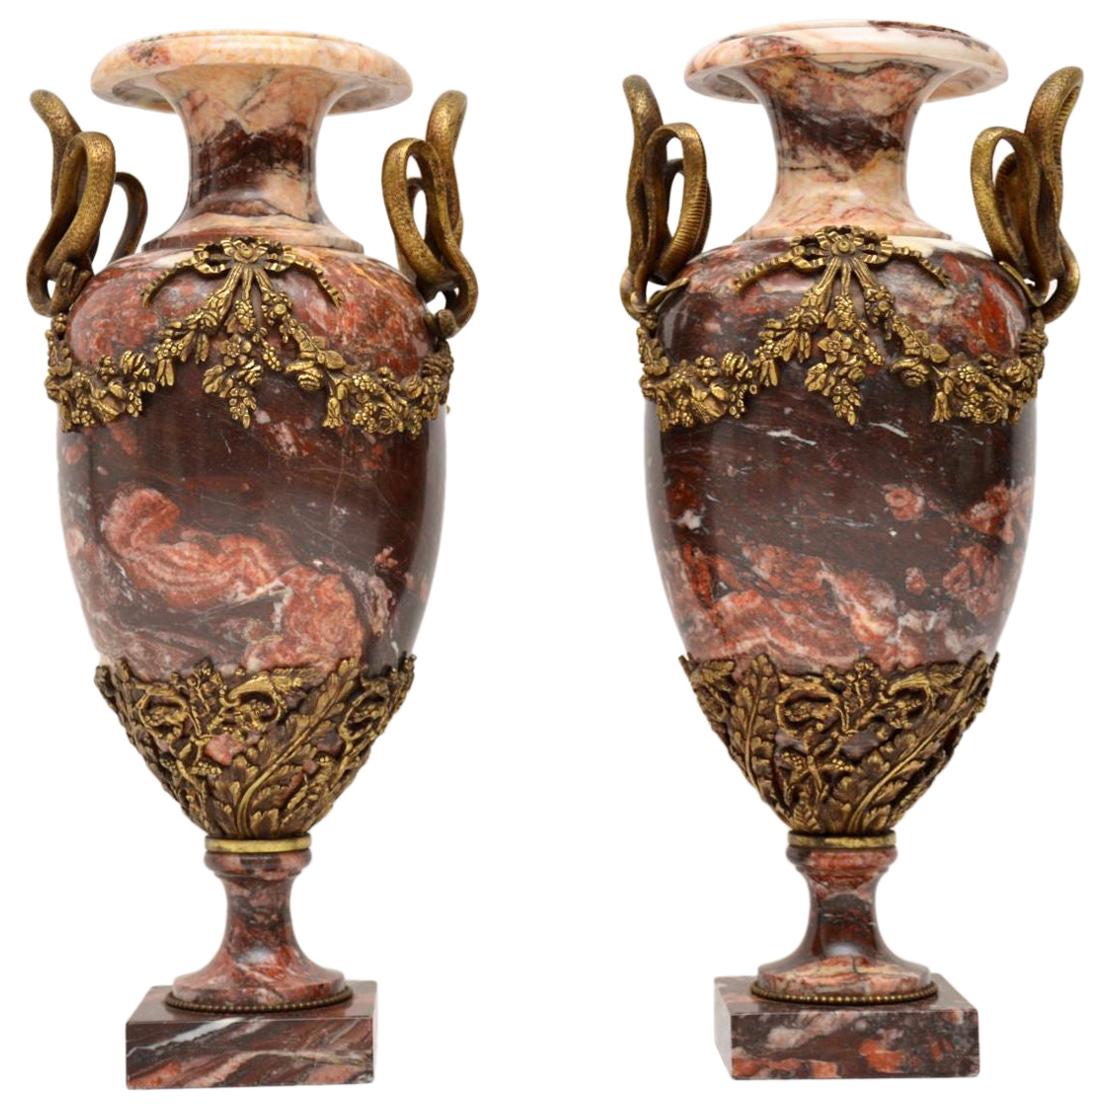 Pair of Antique Solid Marble and Gilt Bronze Urns